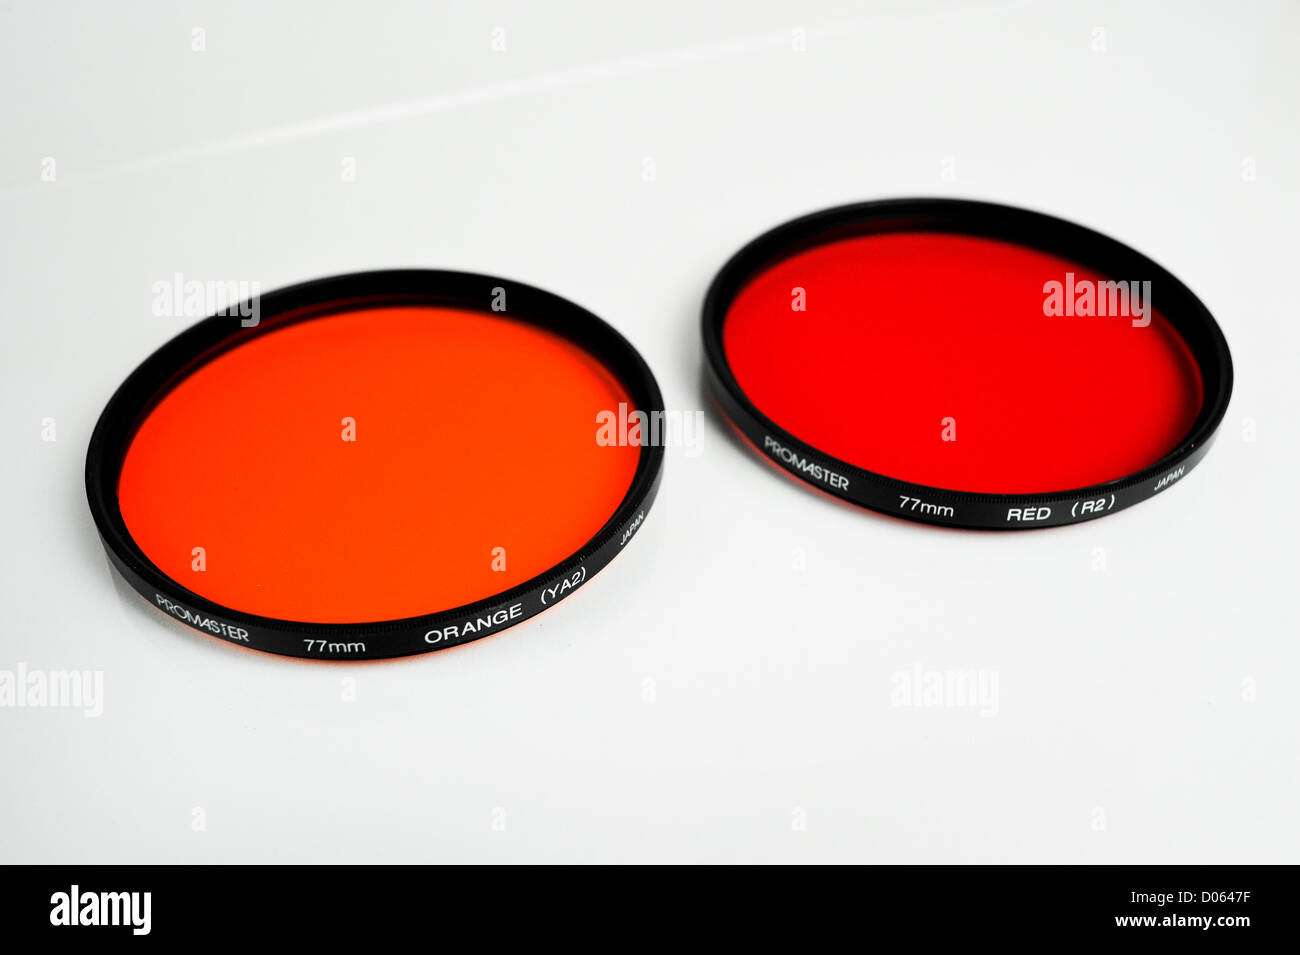 Promaster 72mm Red R2 Filter